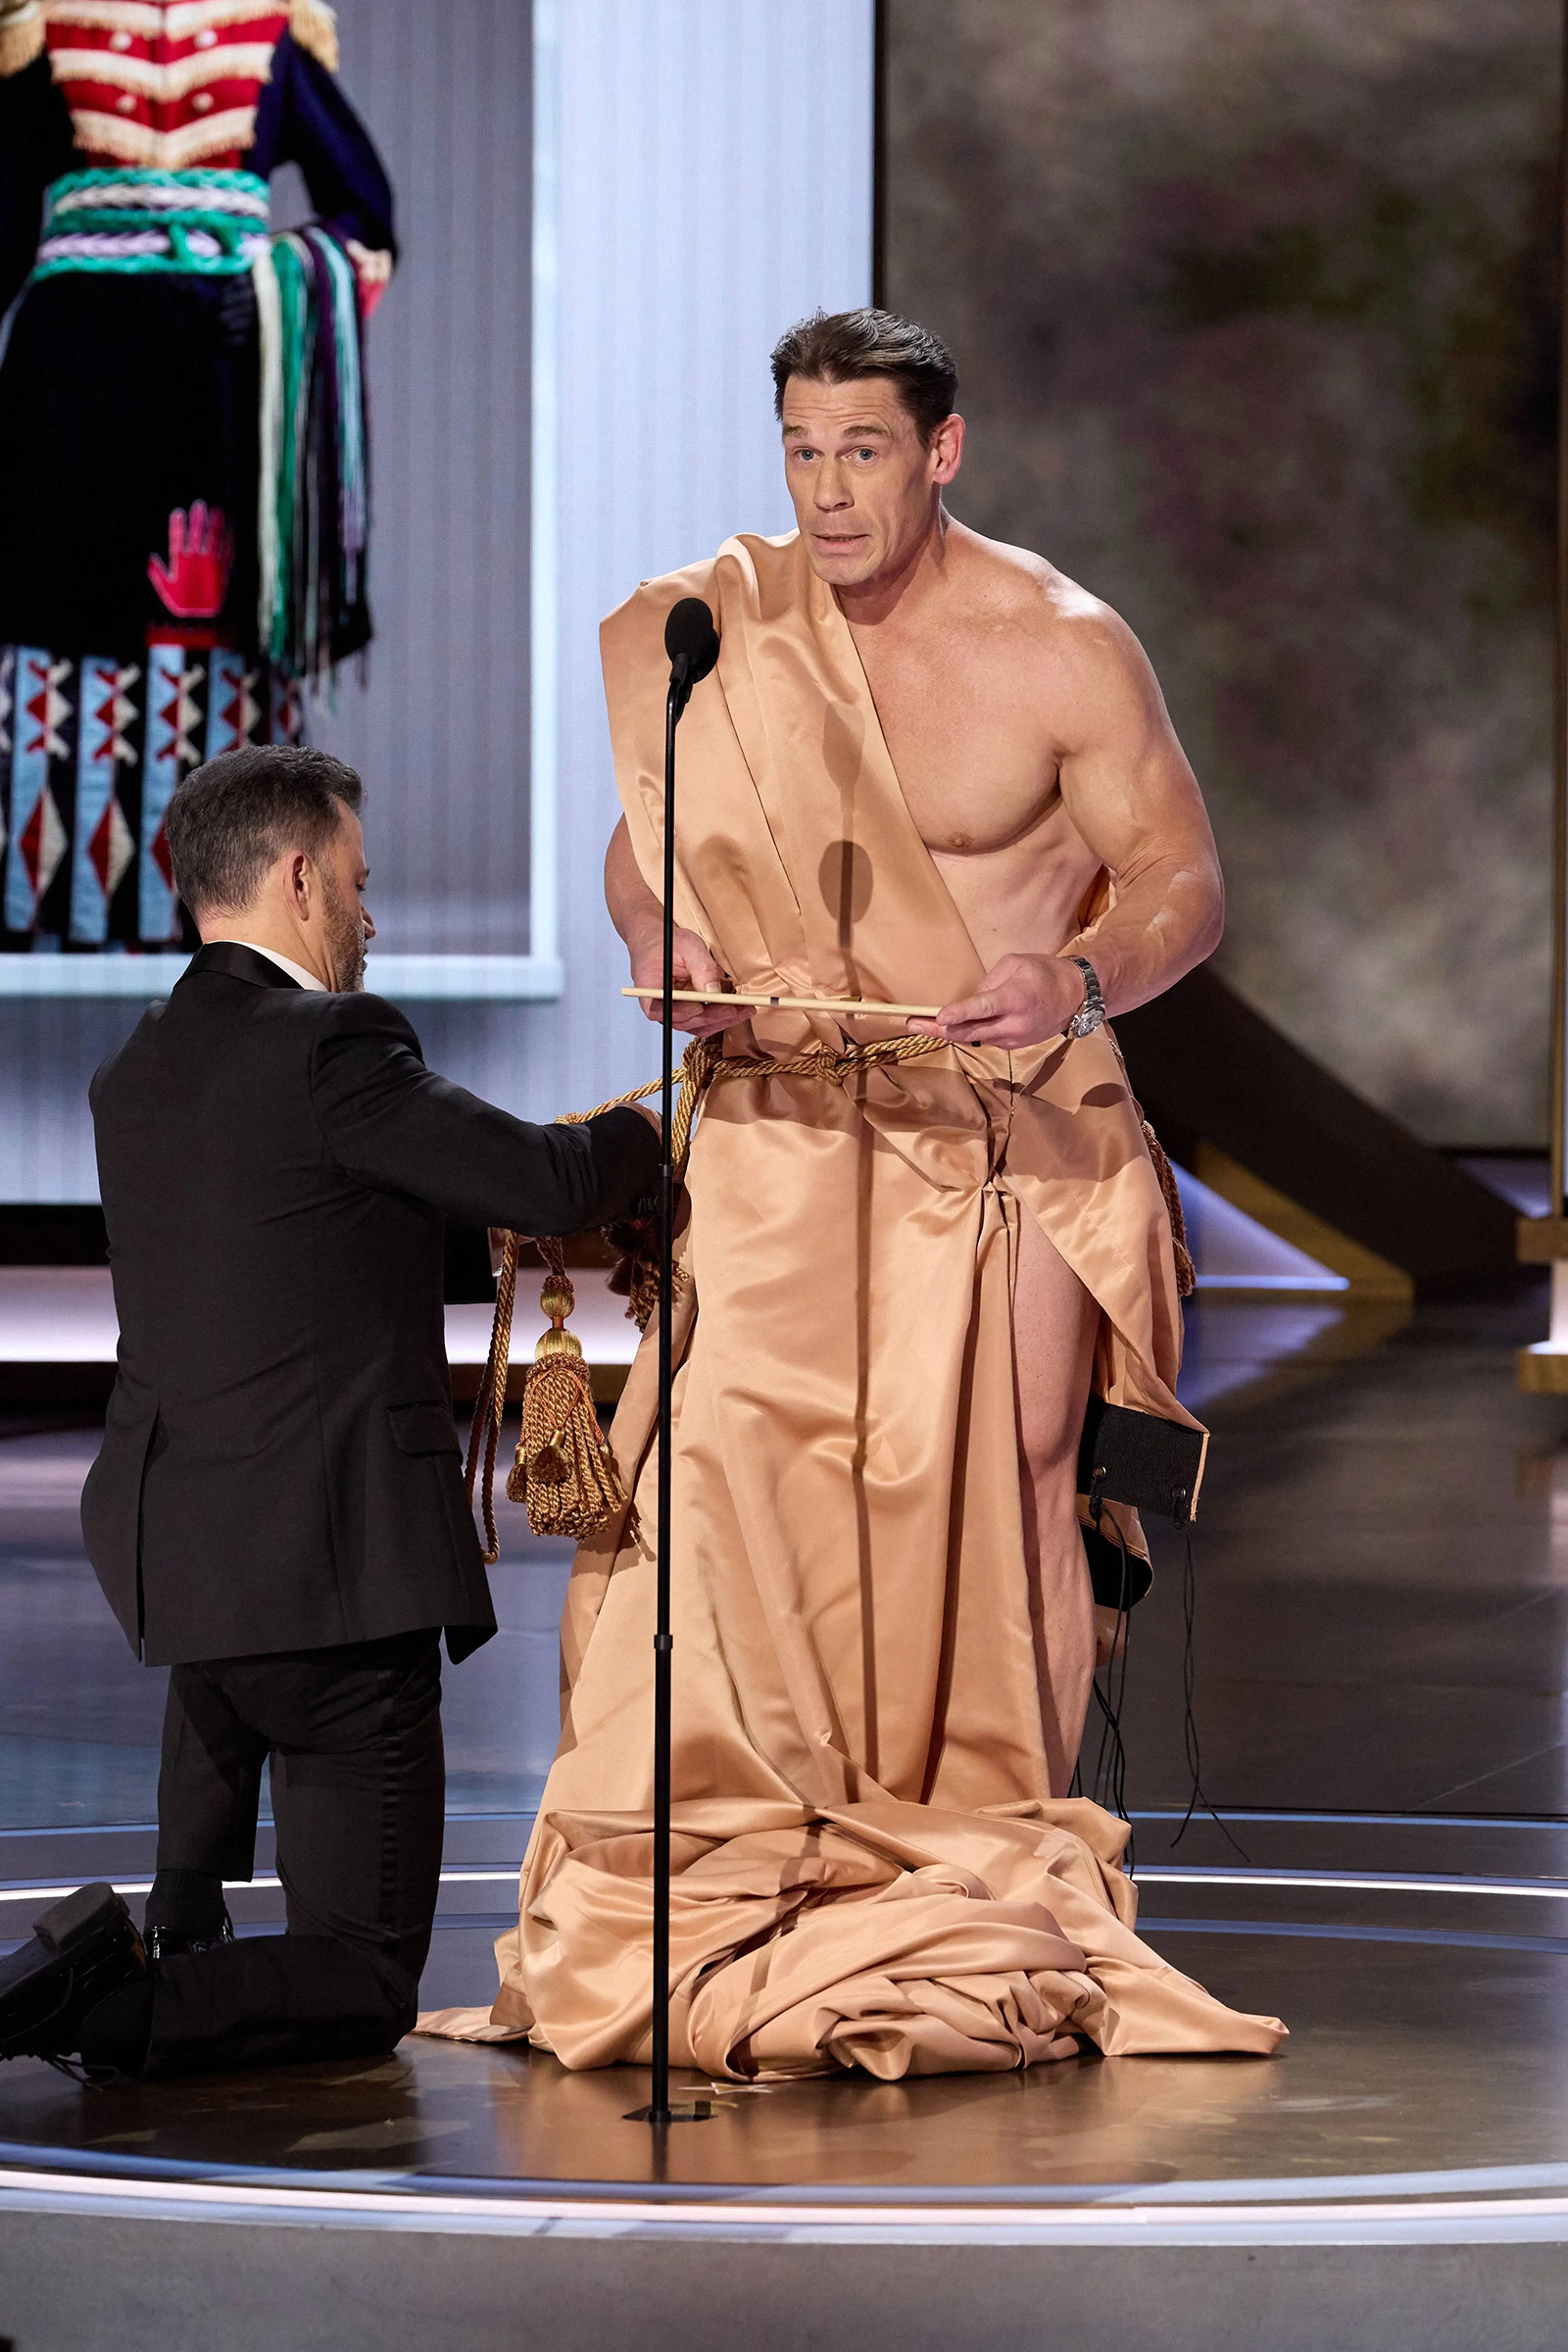 John Cena wearing a toga while presenting the award for Best Costume Design at the 96th Academy Awards at the Dolby Theatre in Hollywood, California on March 10, 2024.